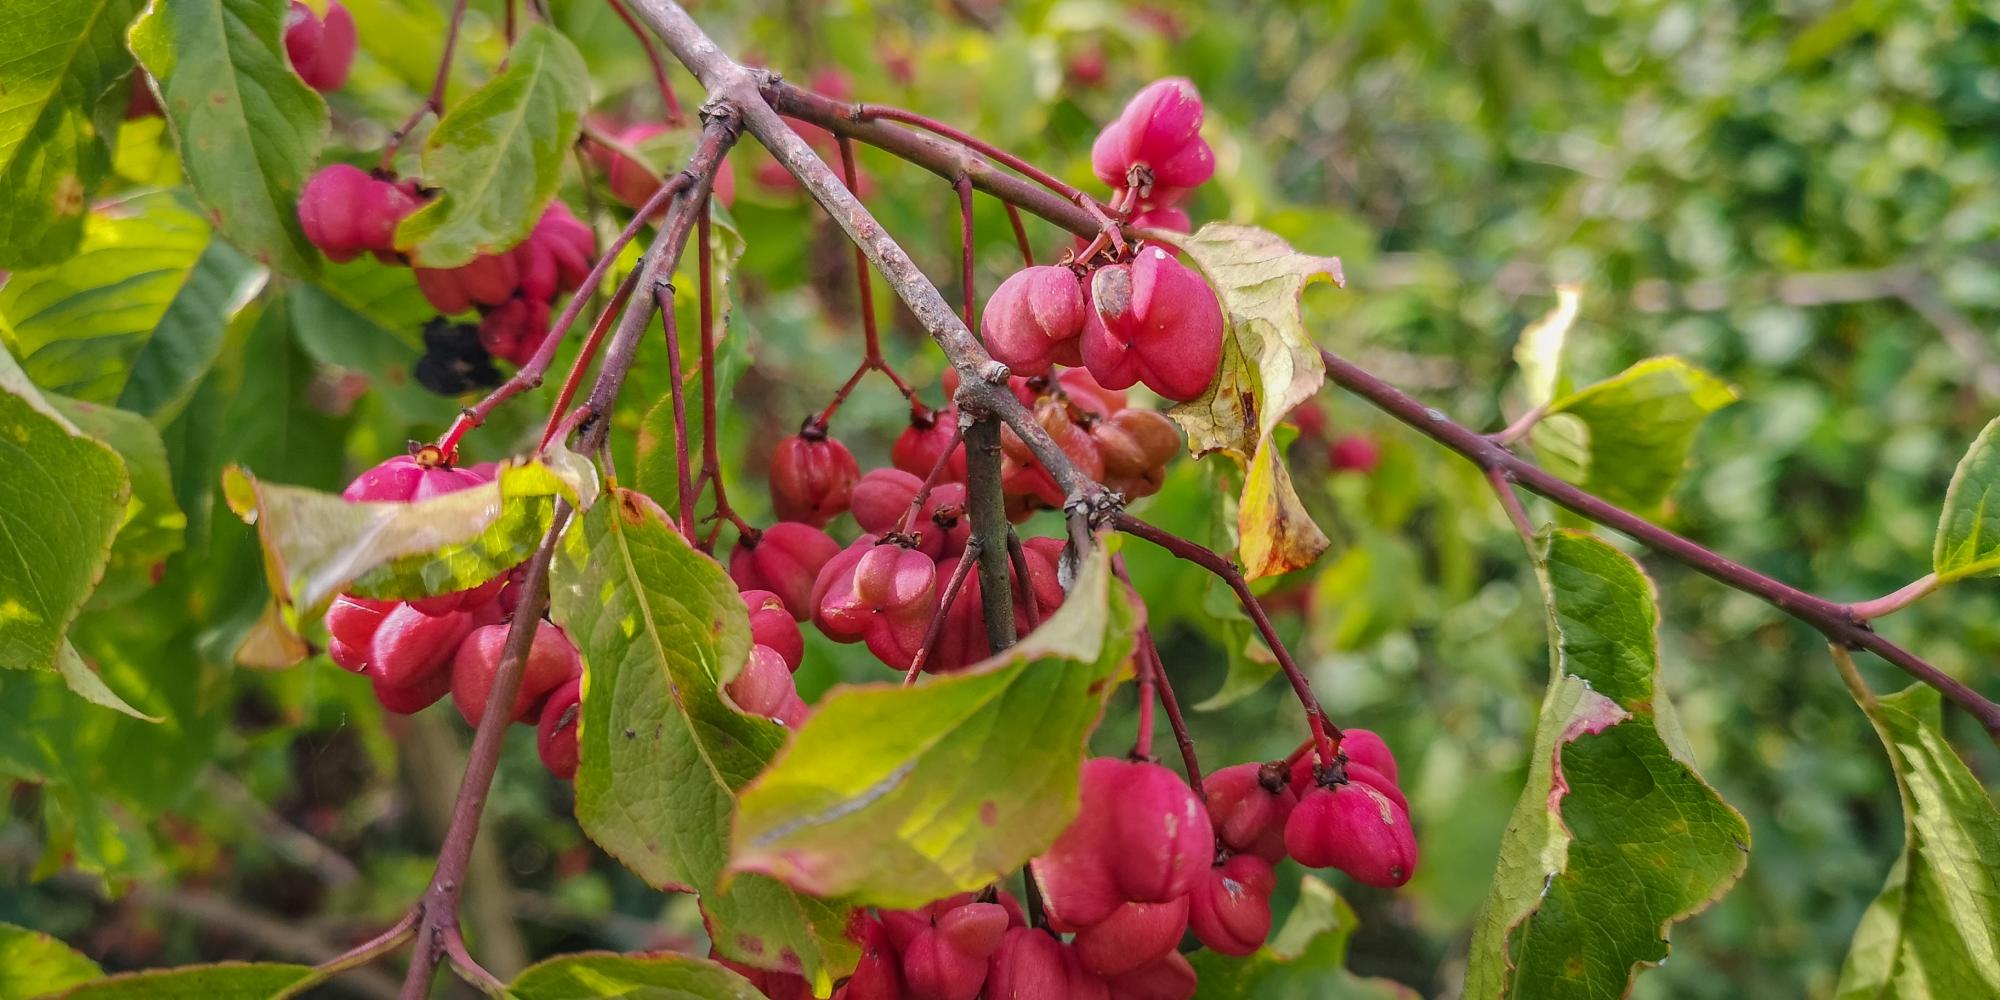 Close up of brightly coloured pink and orange spindle berries on a branches with green leaves